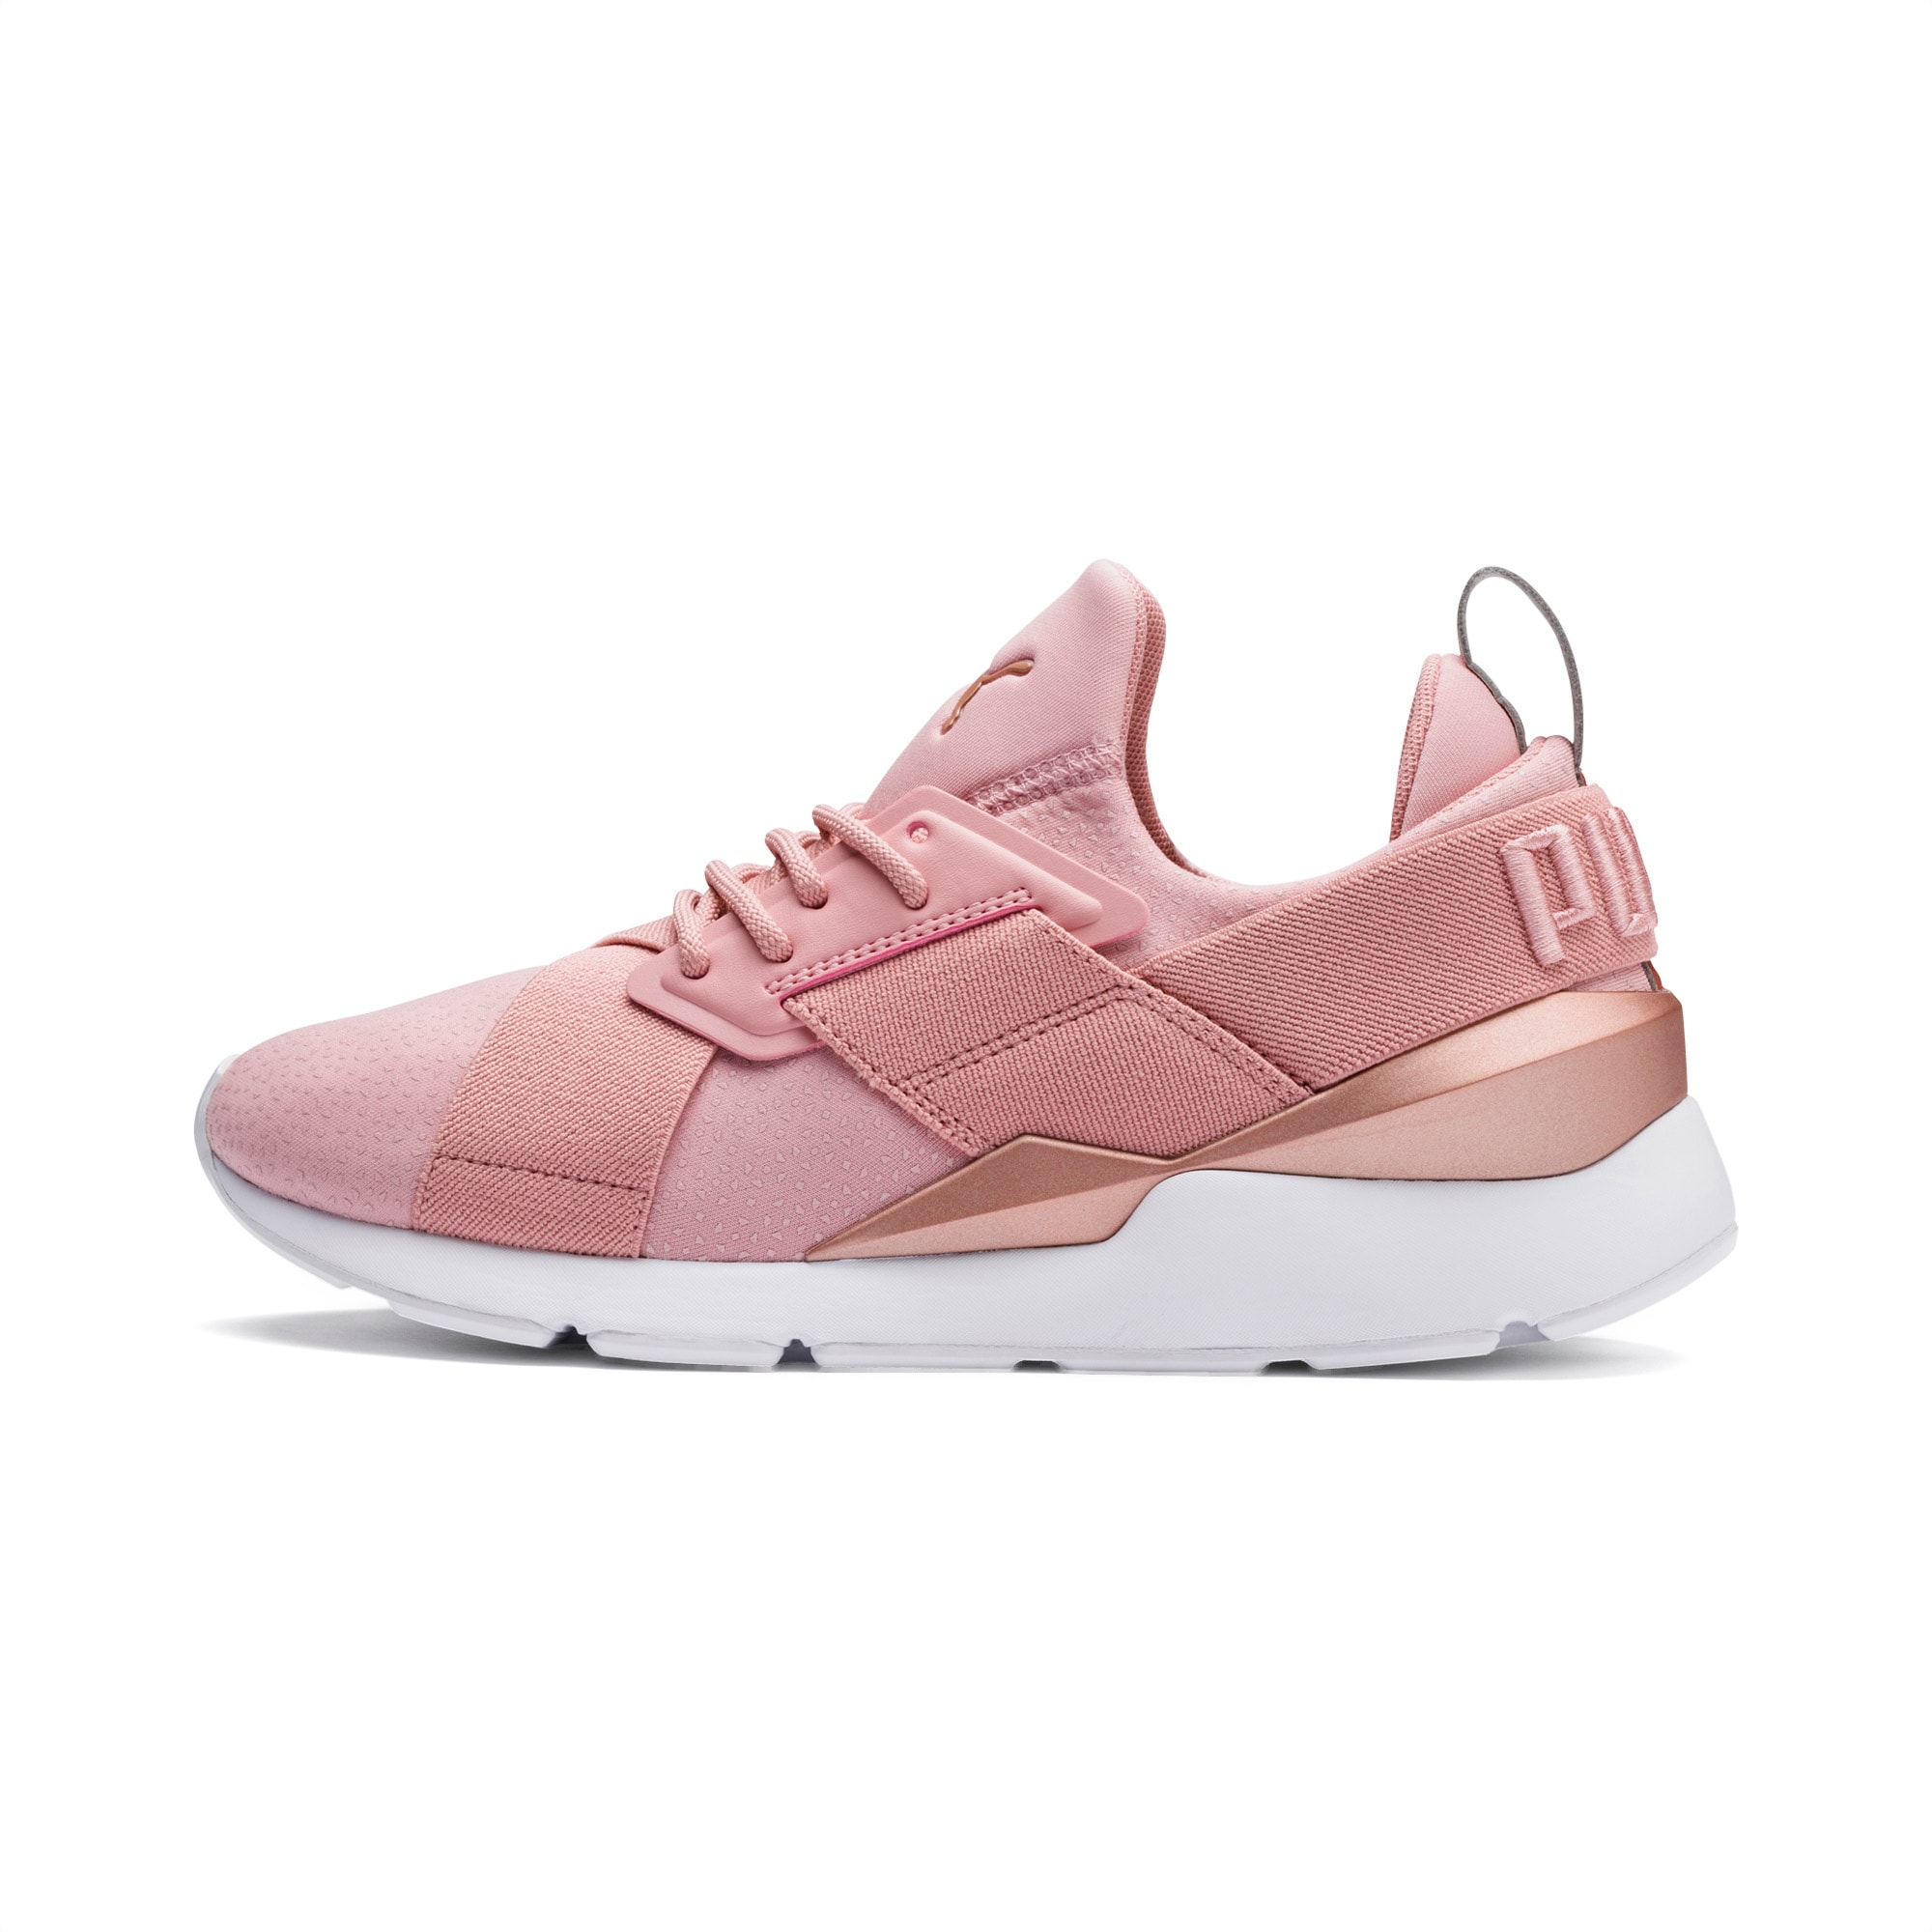 Muse Perf Women's Trainers | PUMA Low 